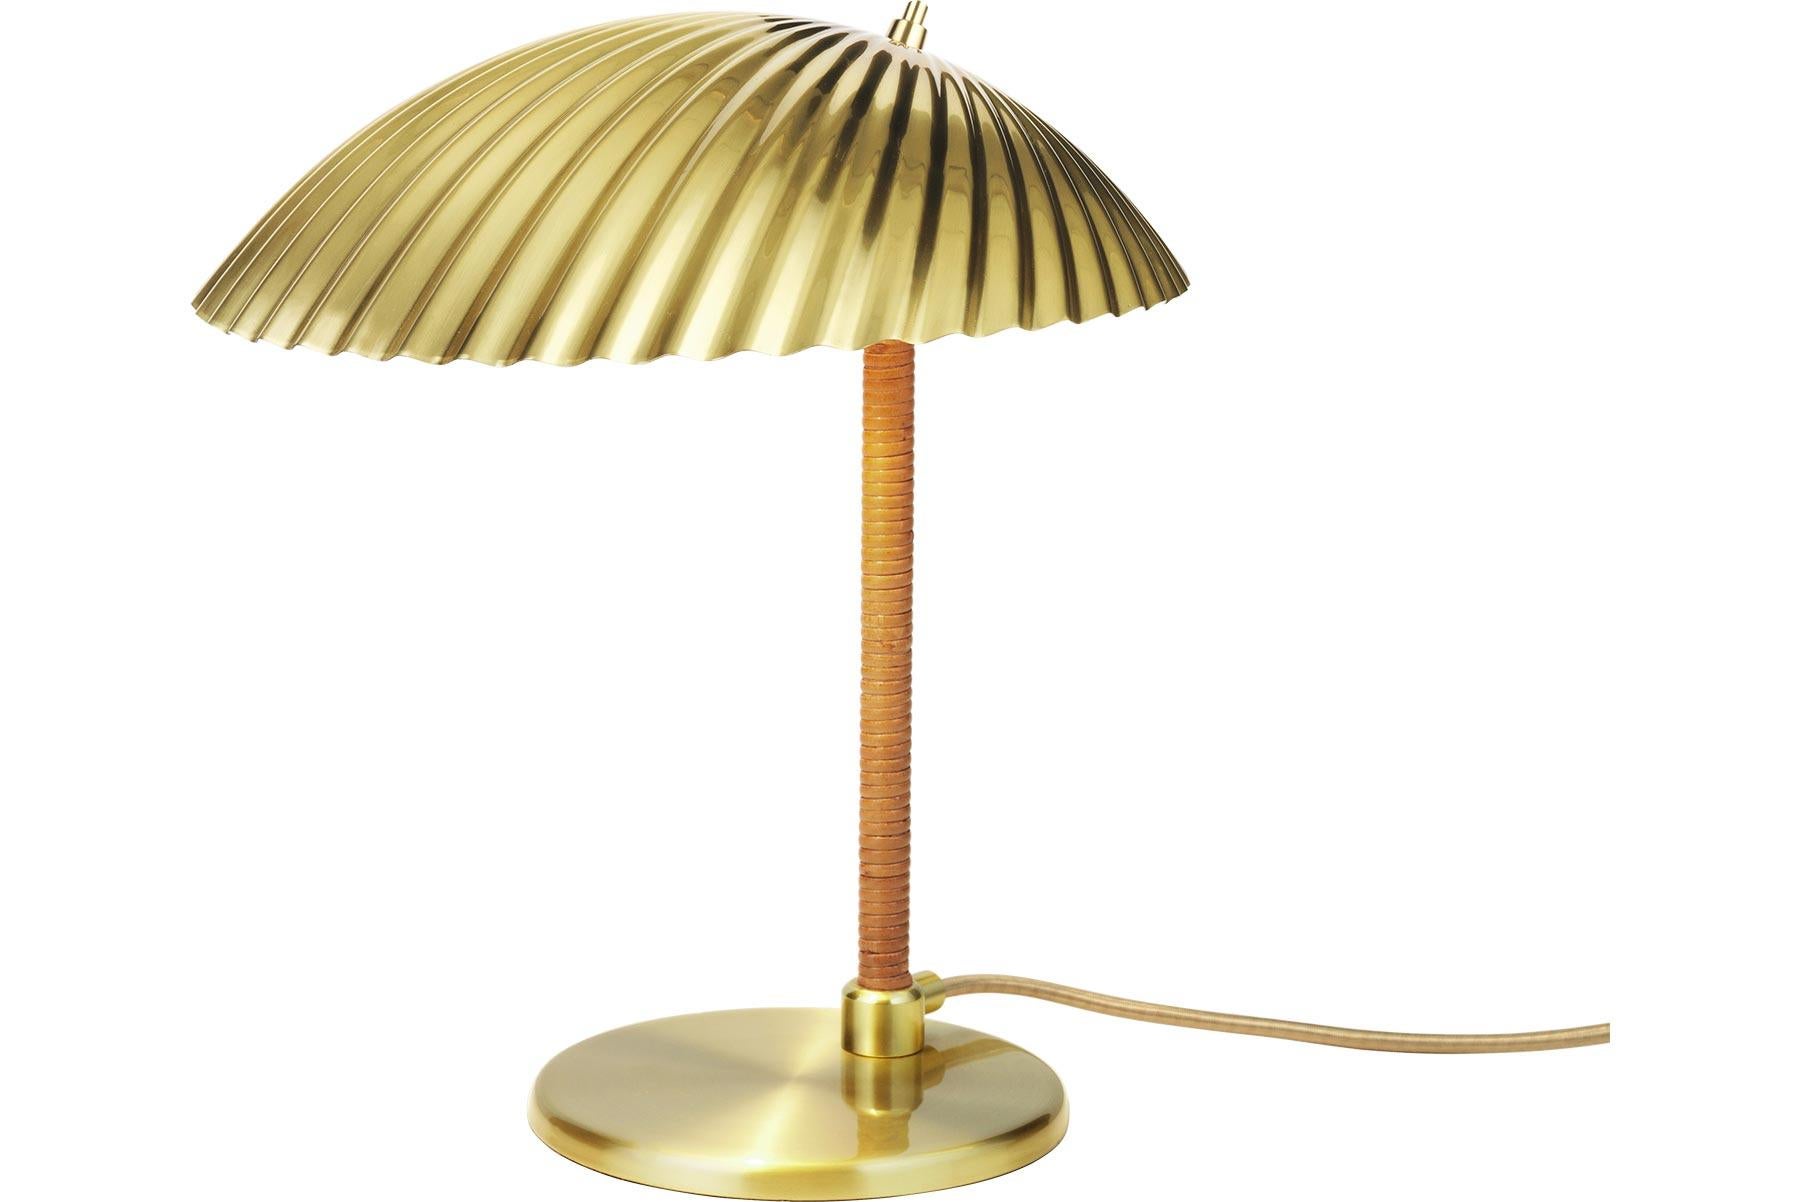 Paavo Tynell’s fanciful take on nature is gracefully echoed in the 5321 Table Lamp, designed by the Finnish designer in 1938. Under the distinctive shell-inspired brass shade, the bulb subtly appears from beneath; a picturesque detail resembling the